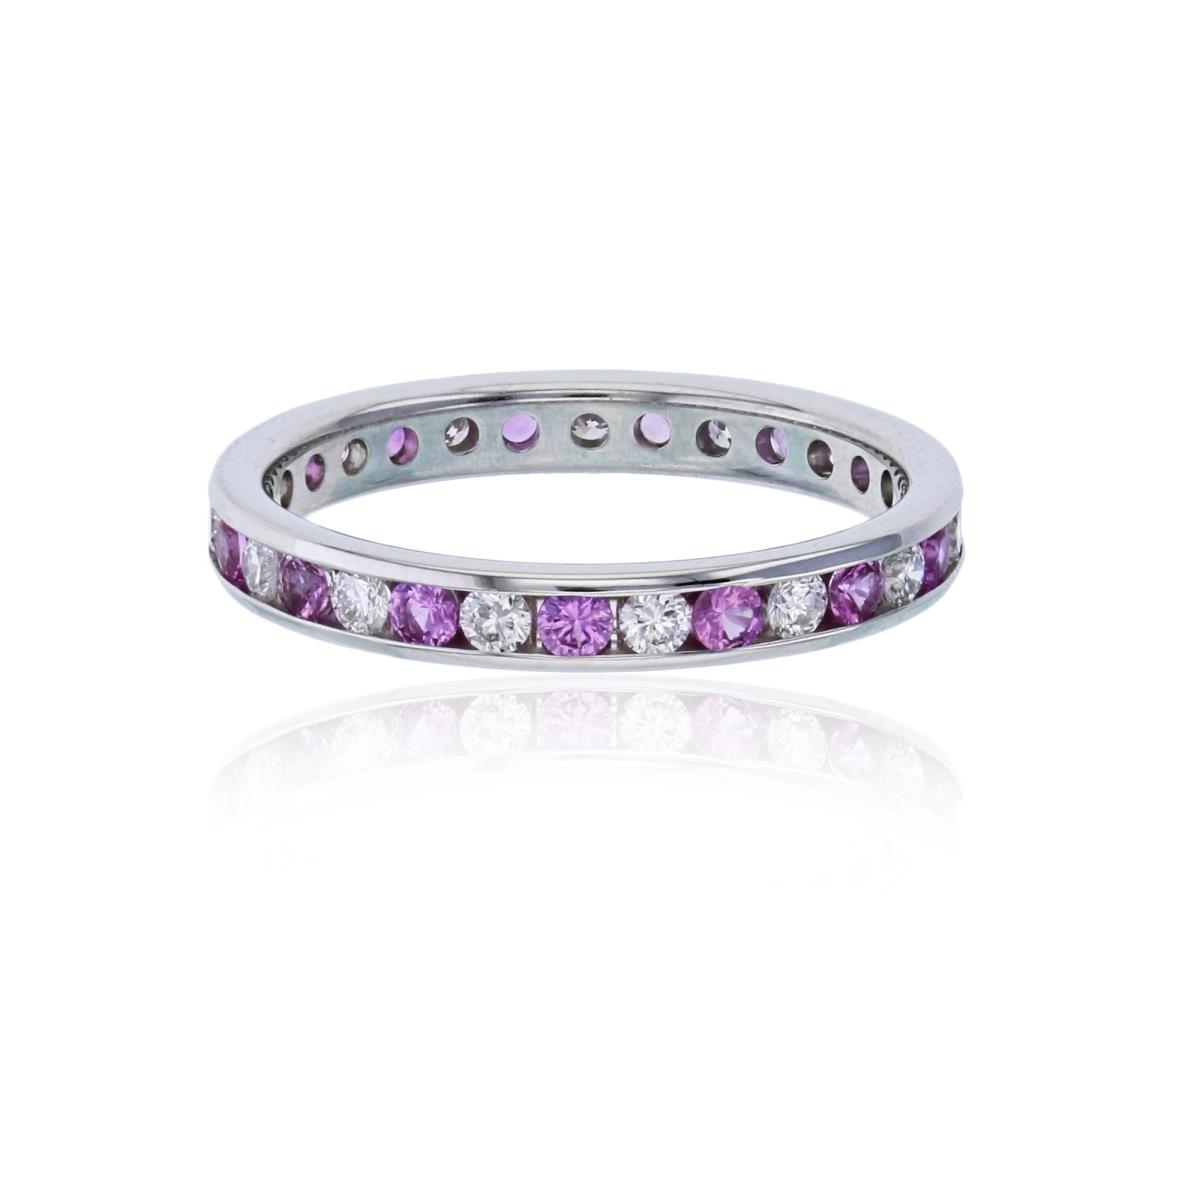 14K White Gold Diamond and Swarovsk Pastel Red Pink Sapph Alternating 30-Stone Rd Channel Eternity Band Ring